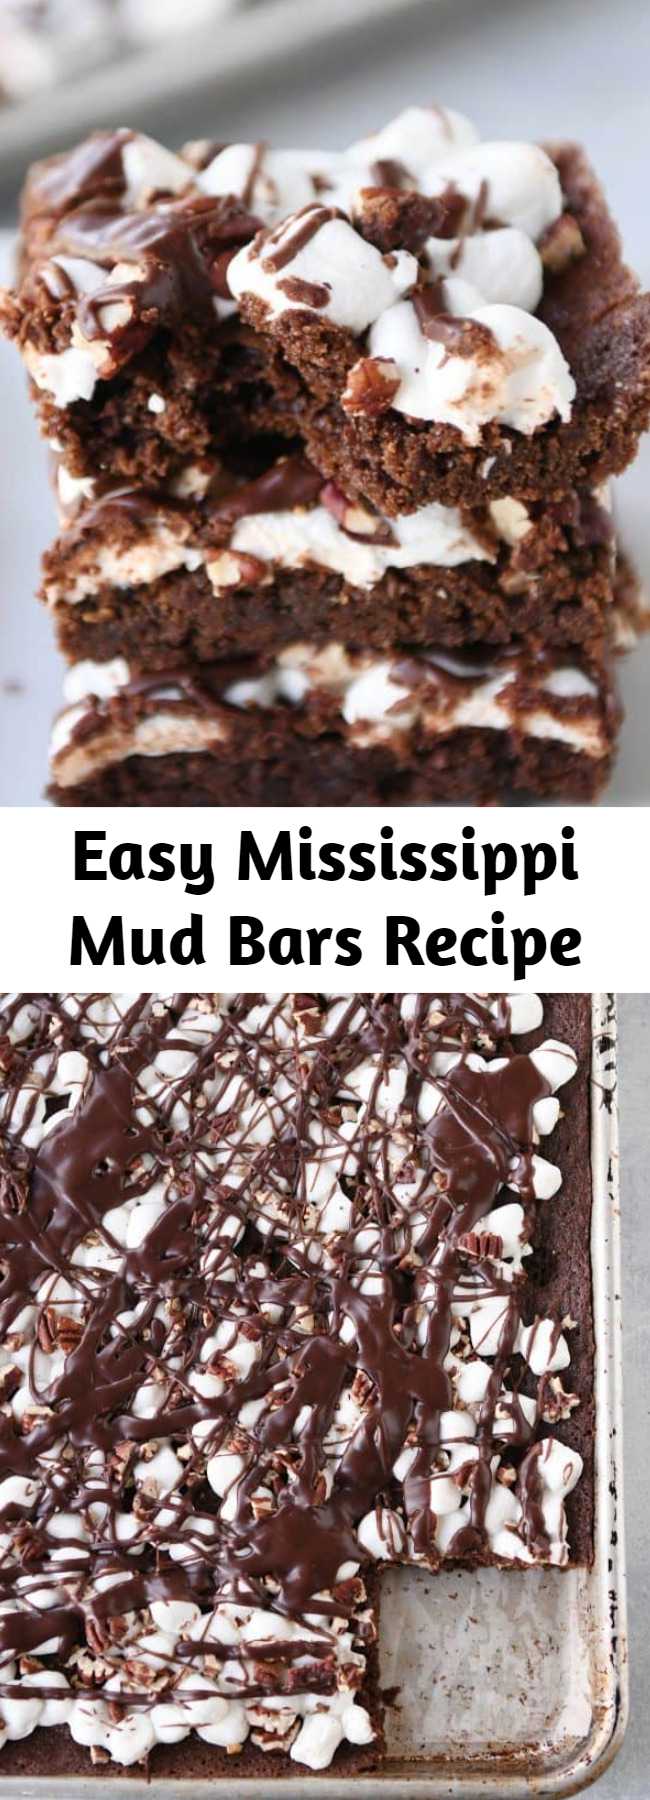 Easy Mississippi Mud Bars Recipe - The brownie + marshmallows + toasted pecans + fudge sauce combo has never been tastier (or easier!). These Mississippi Mud Bars are insanely delicious and so simple to make!